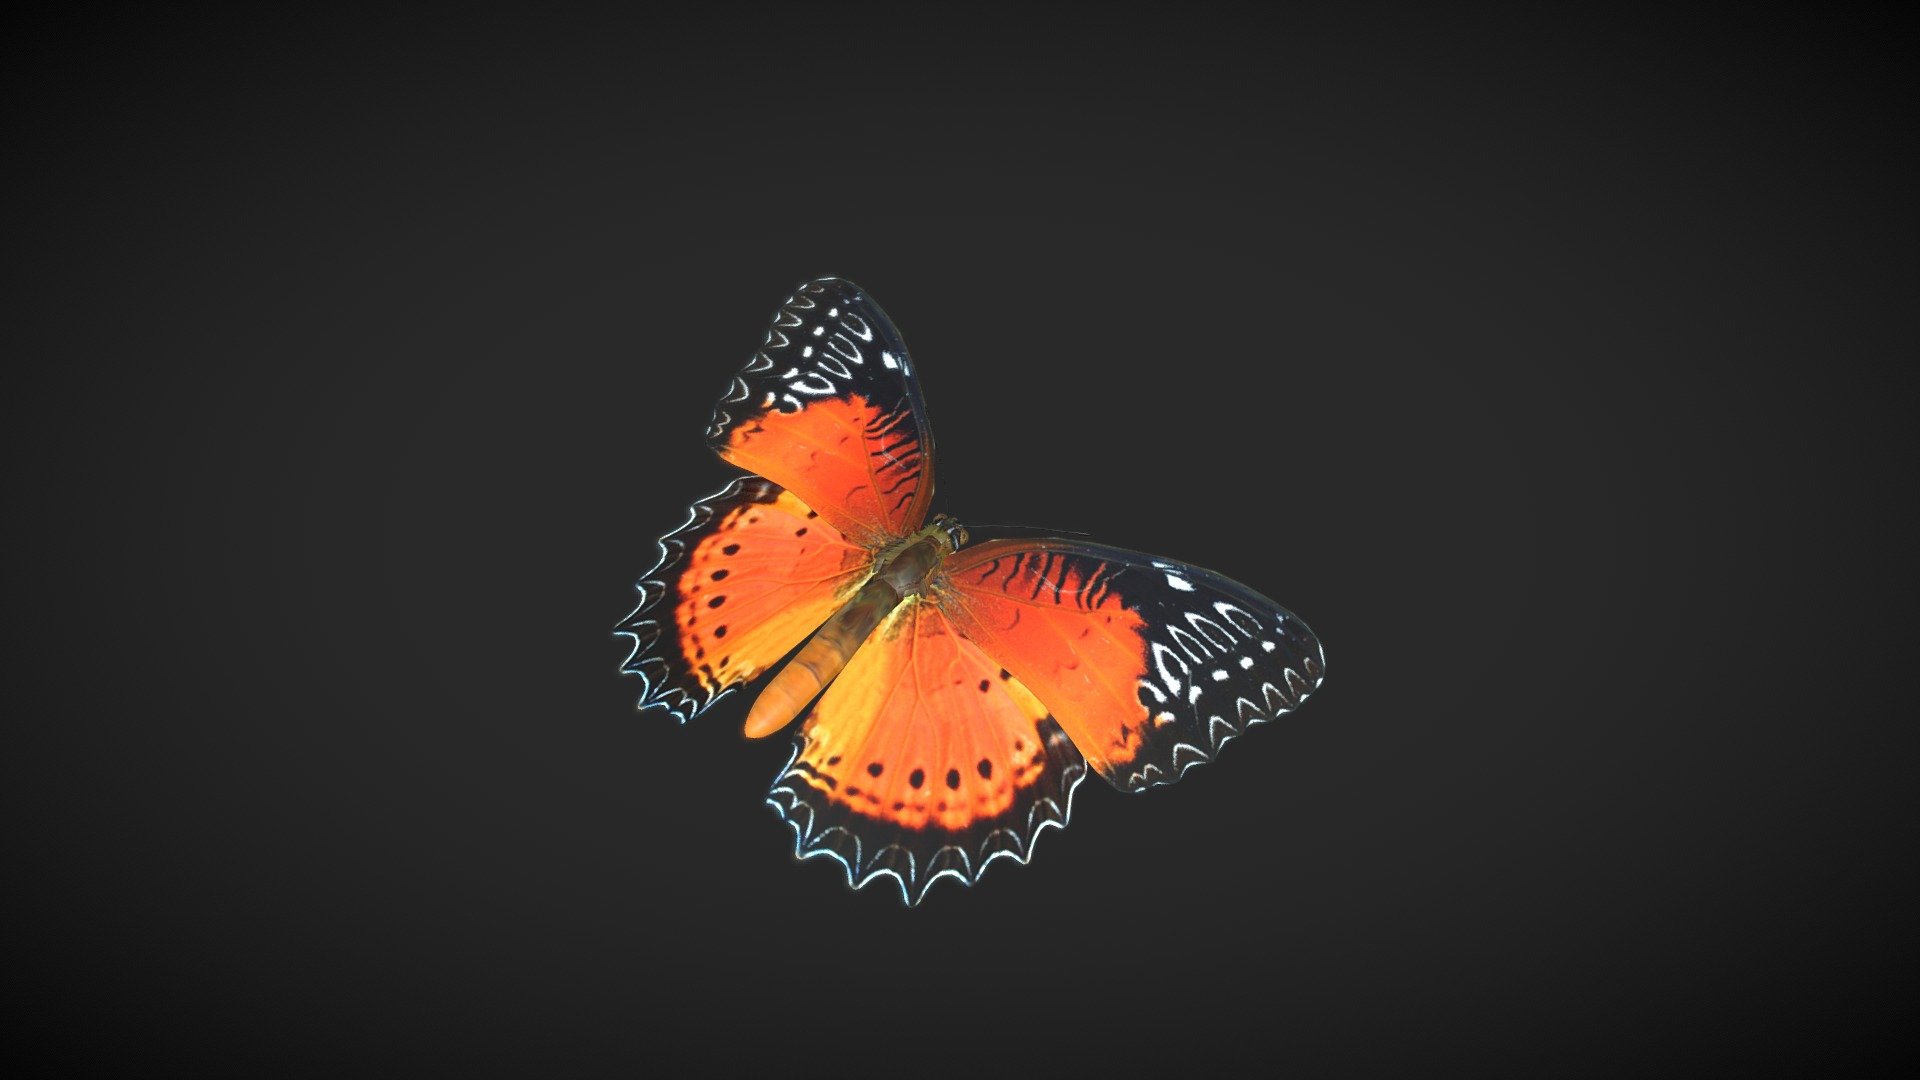 A butterfly model made for our VR project, Lepidoptera https://store.steampowered.com/app/2491860/Lepidoptera/?beta=0. It is a derivative of https://commons.wikimedia.org/wiki/File:Open_wing_basking_position_of_Cethosia_biblis_(Drury,1773)-_Red_Lacewing.jpg by Atanu Bose Photography, CC BY-SA 4.0 https://creativecommons.org/licenses/by-sa/4.0, via Wikimedia Commons and https://commons.wikimedia.org/wiki/File:Red_Lacewing(Cethosia_biblis).jpg by John Pavelka, CC BY 2.0 https://creativecommons.org/licenses/by/2.0, via Wikimedia Commons 3d model